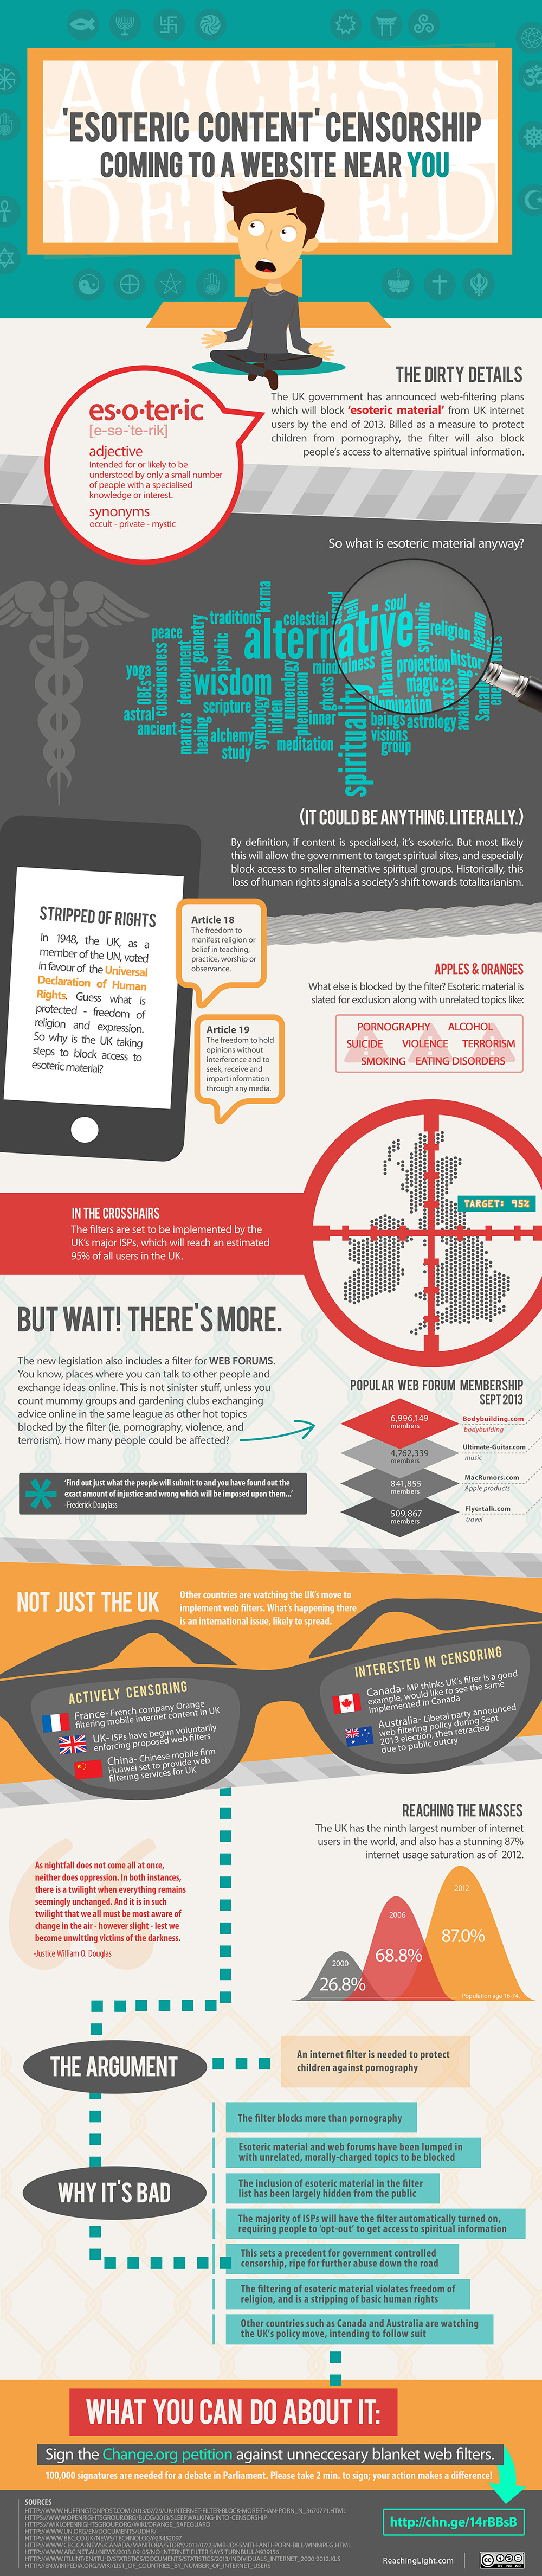 Infographic: UK Filter to Block 'Esoteric Content'